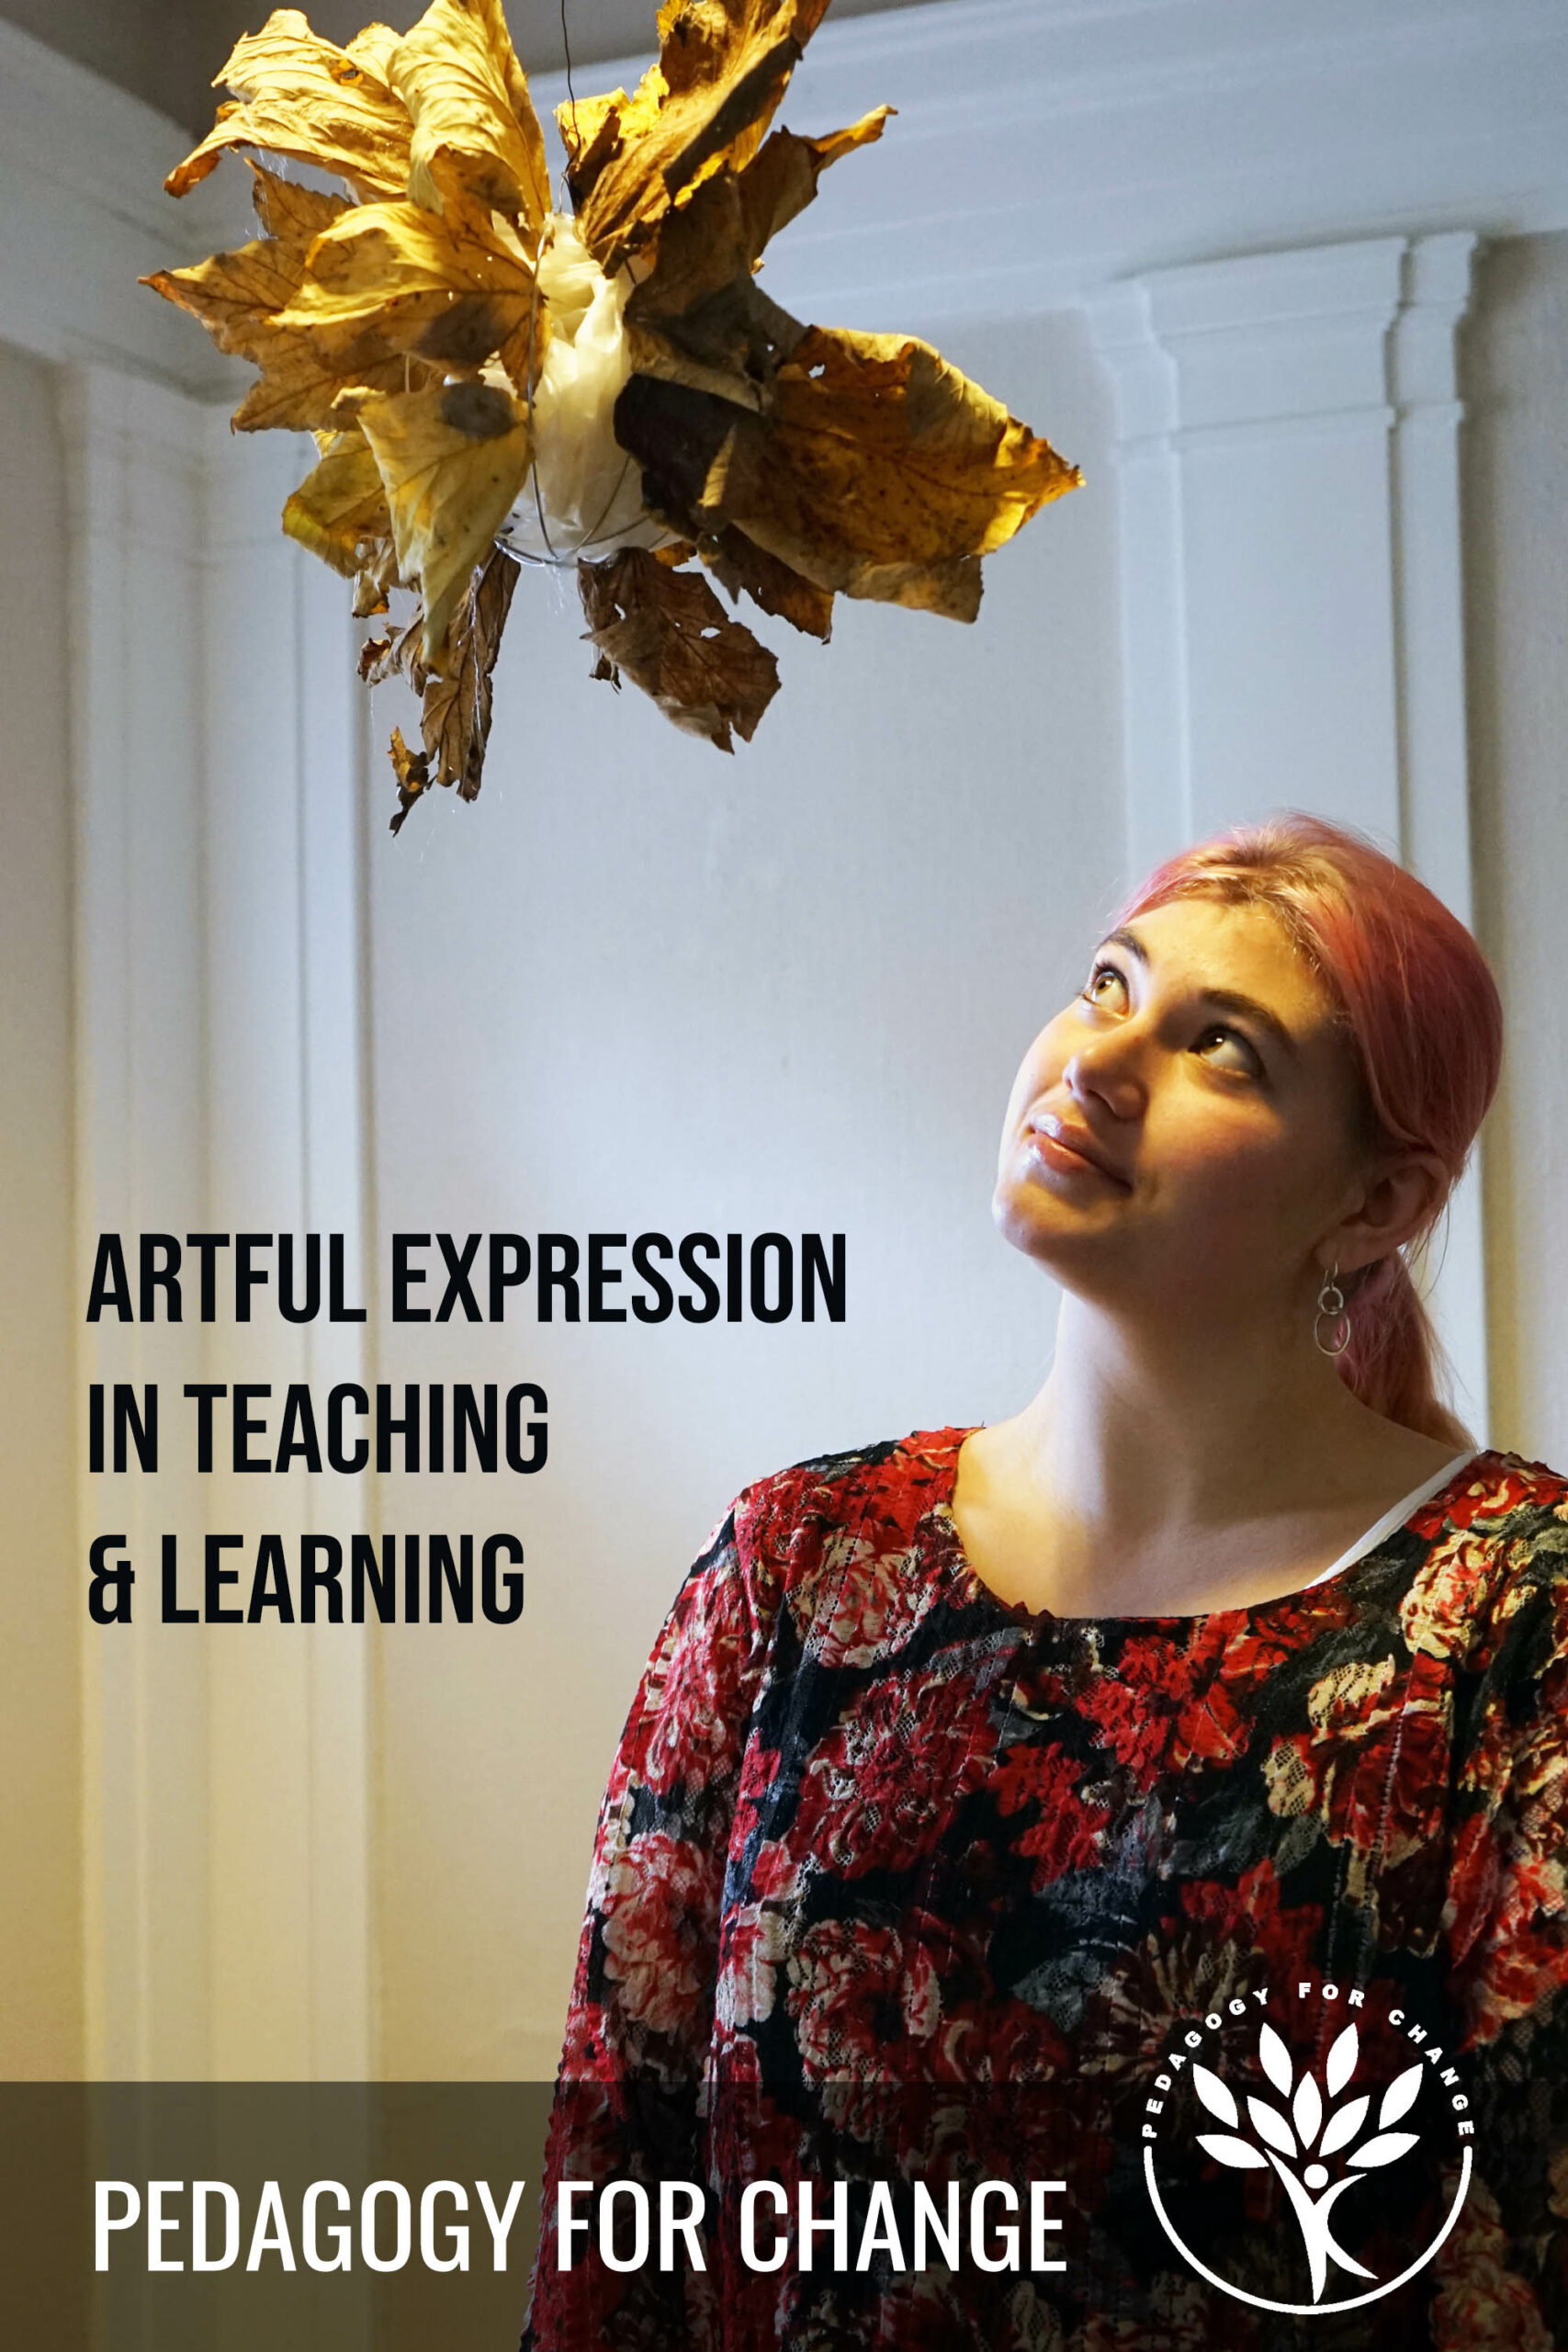 Artful expression in teaching and learning